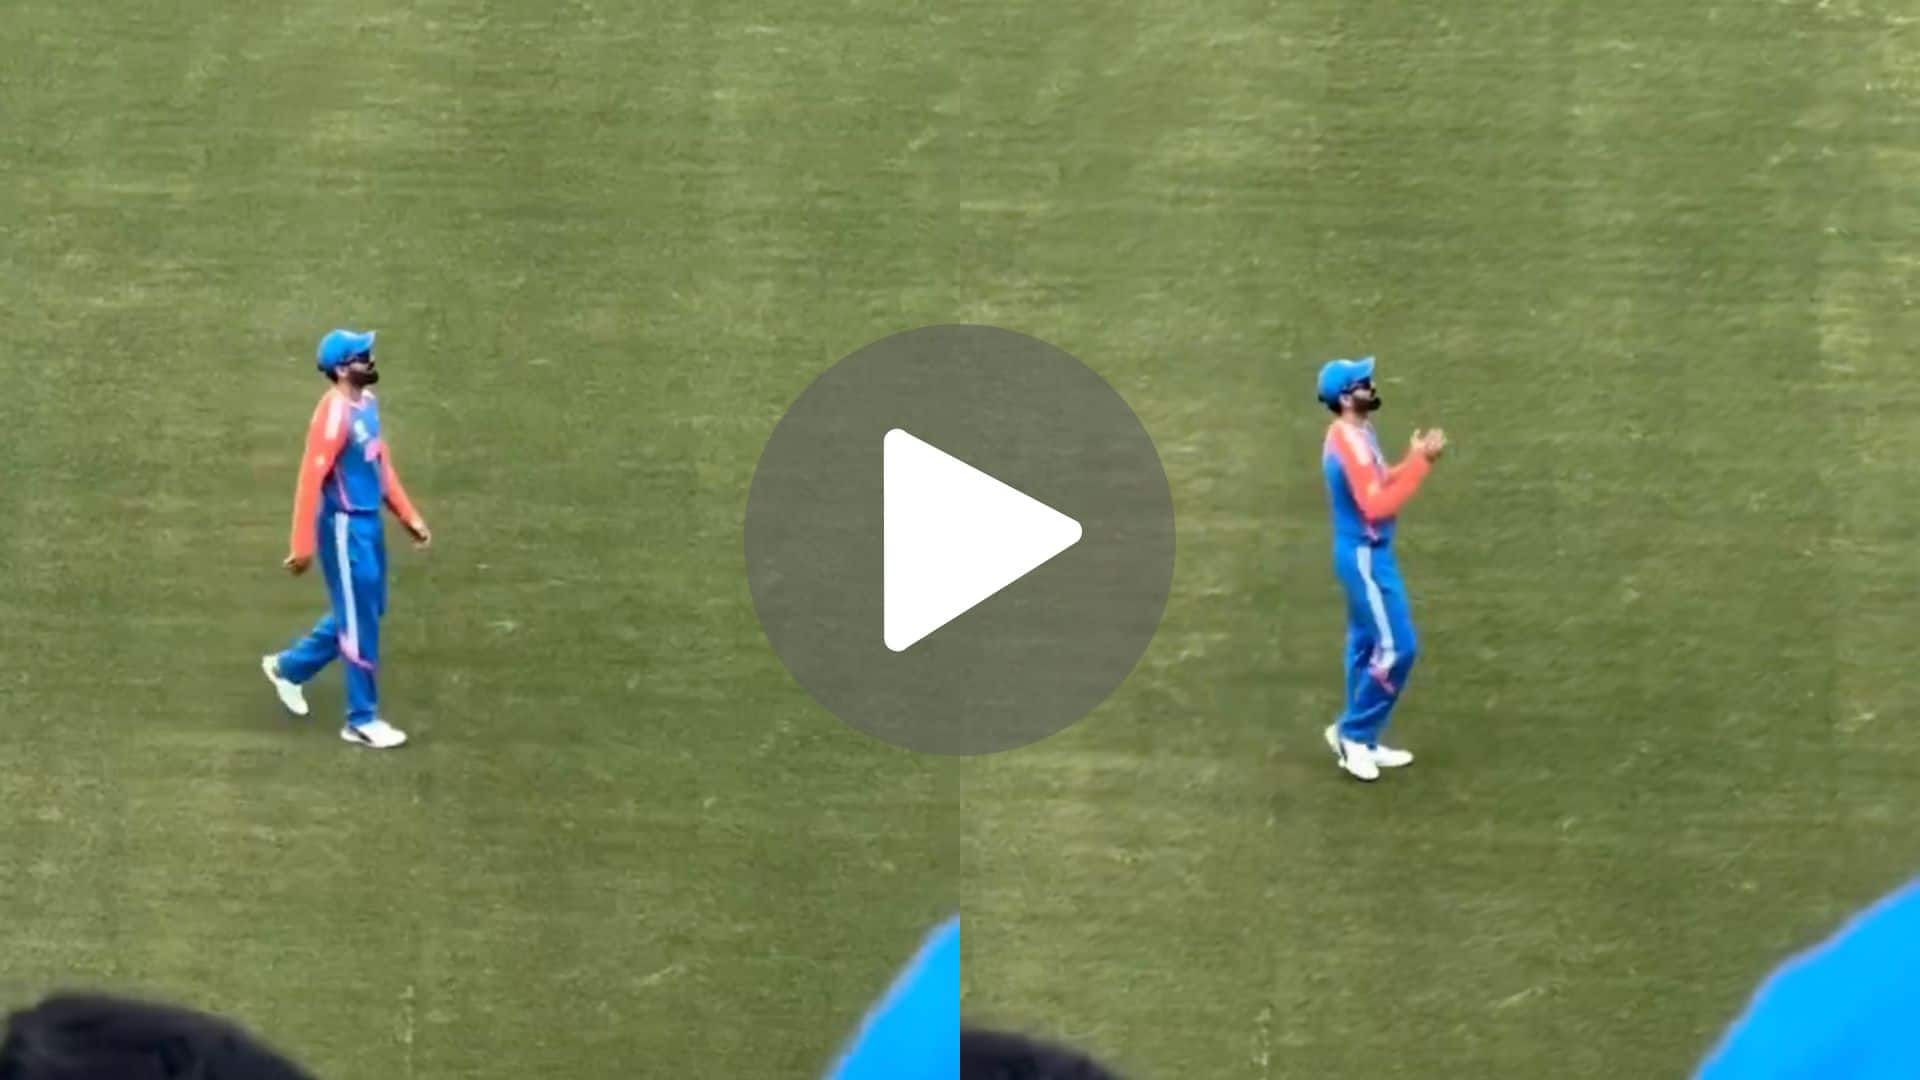 [Watch] 'Kohli Ko Bowling Do,' Fans Urge Rohit To Give Virat The Ball During IND vs IRE